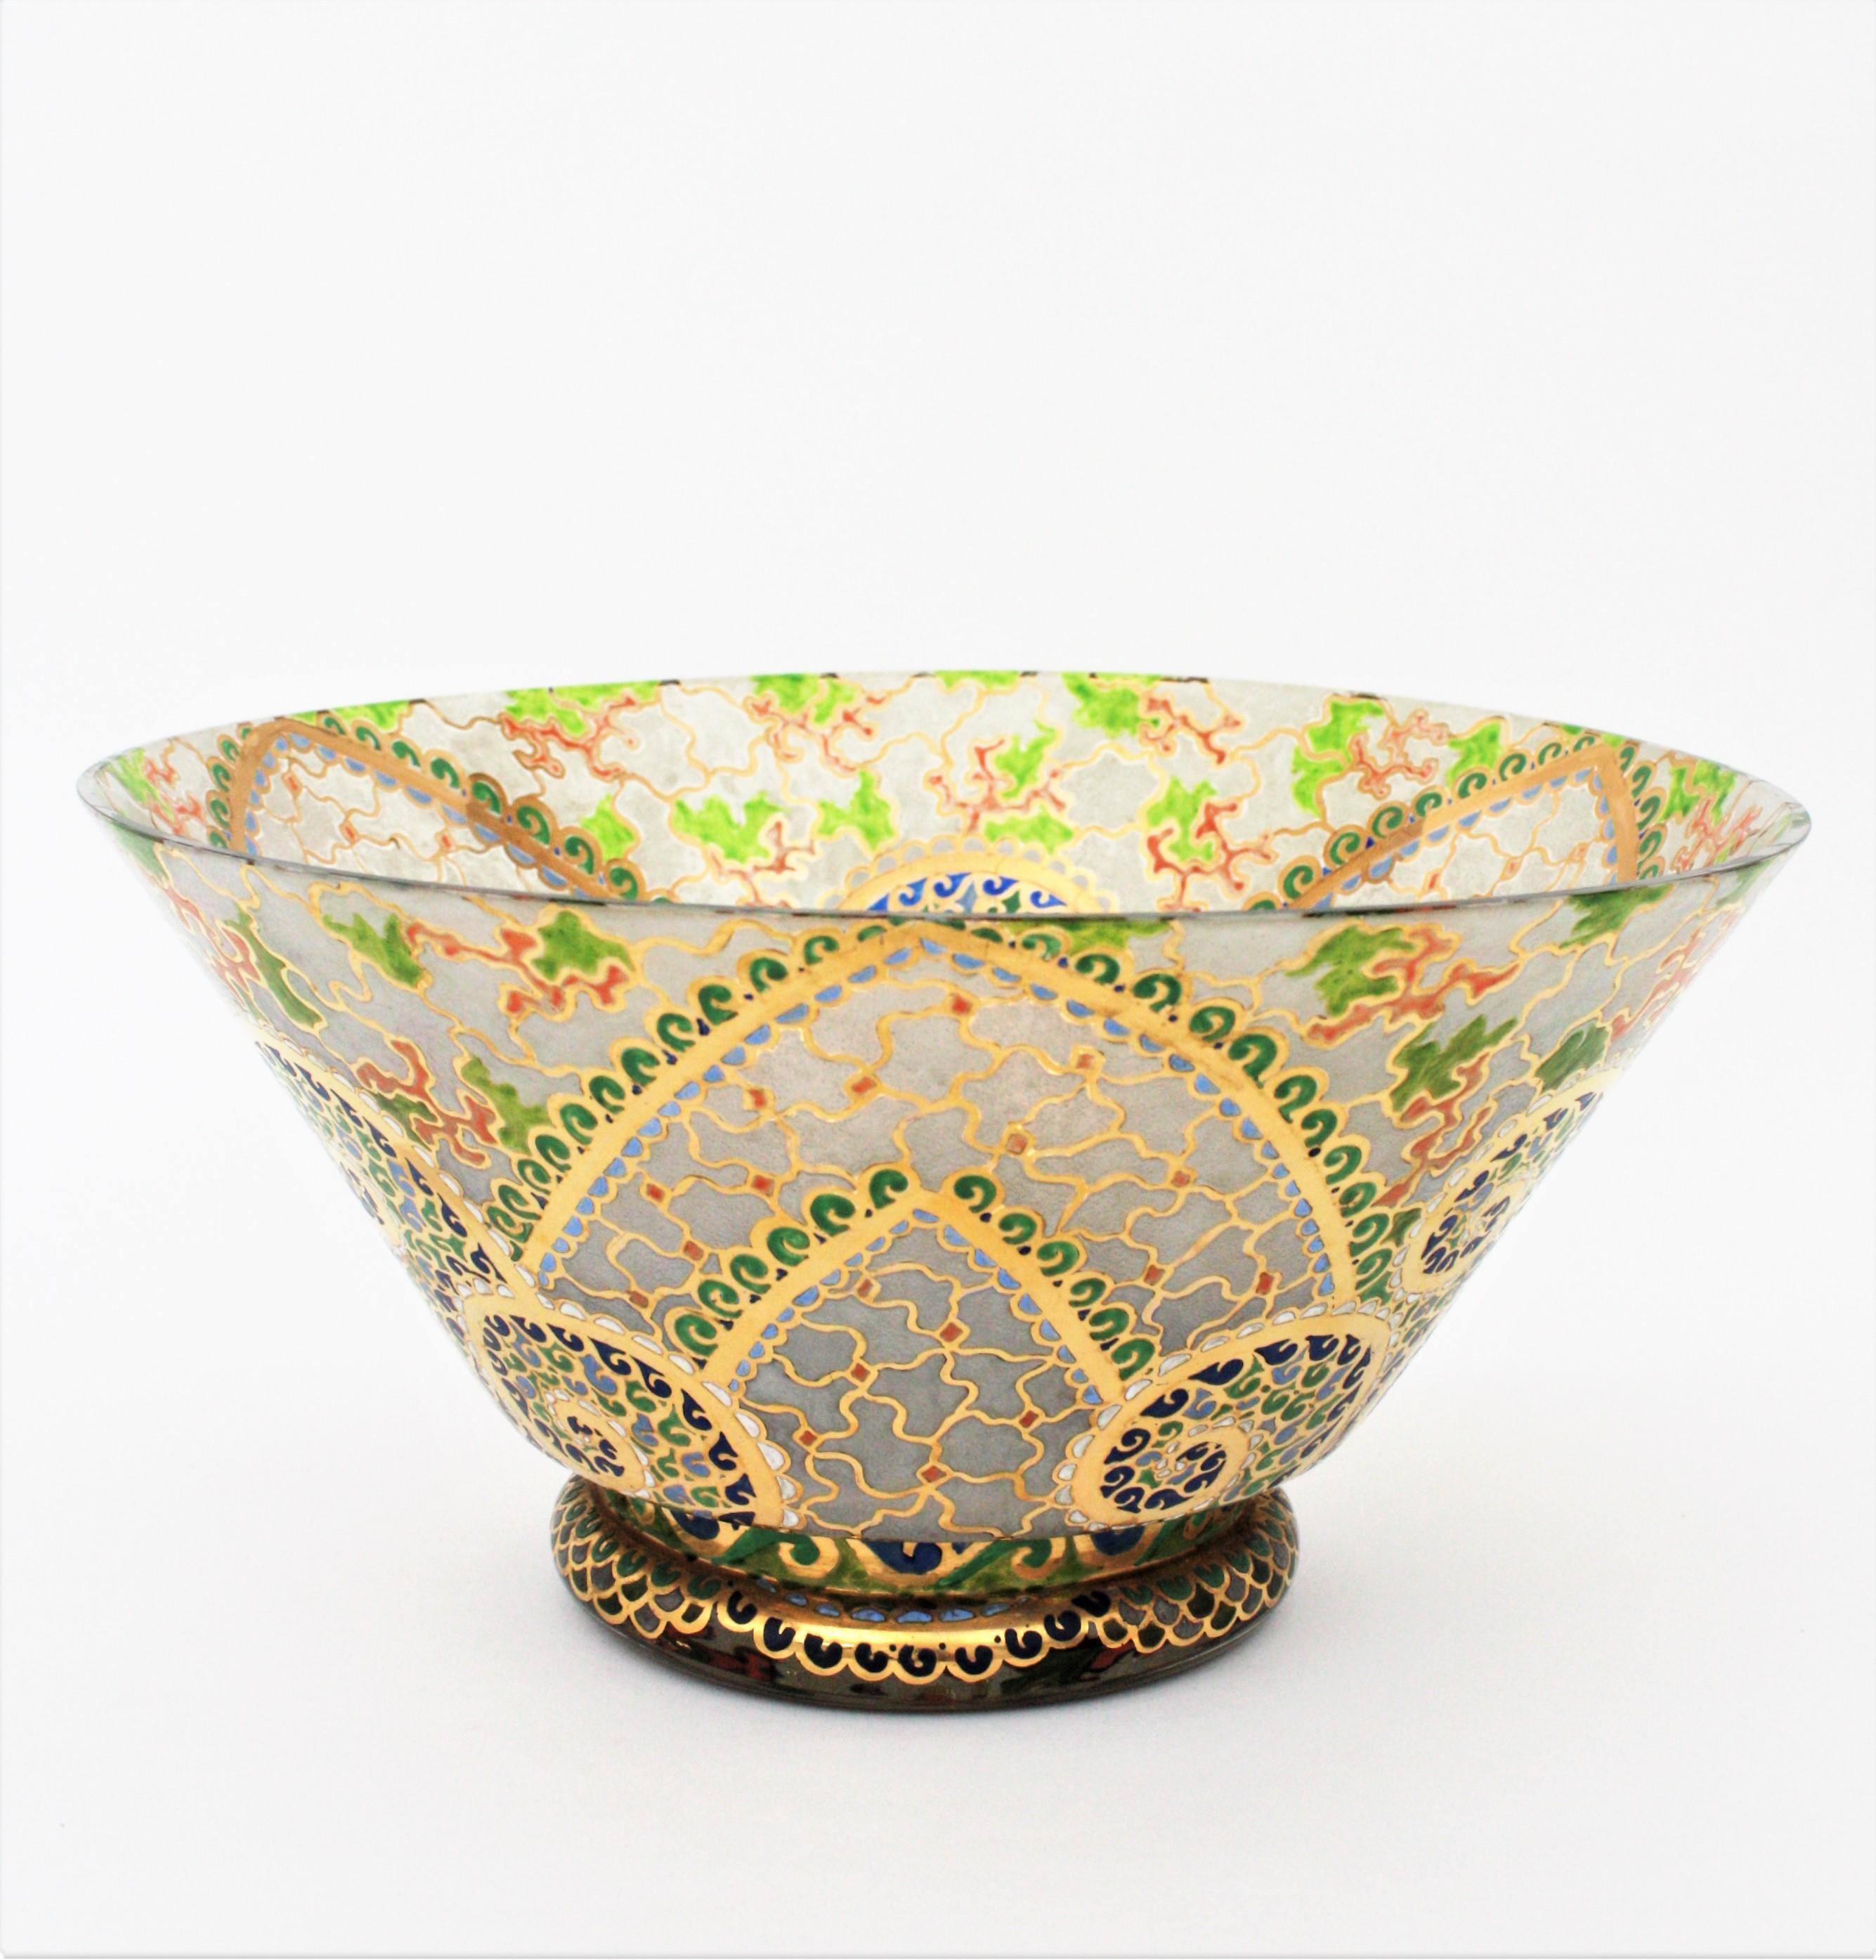 Art Deco Hand Painted Enameled Polychrome & Gold Glass Centerpiece Bowl by Riera (20. Jahrhundert)